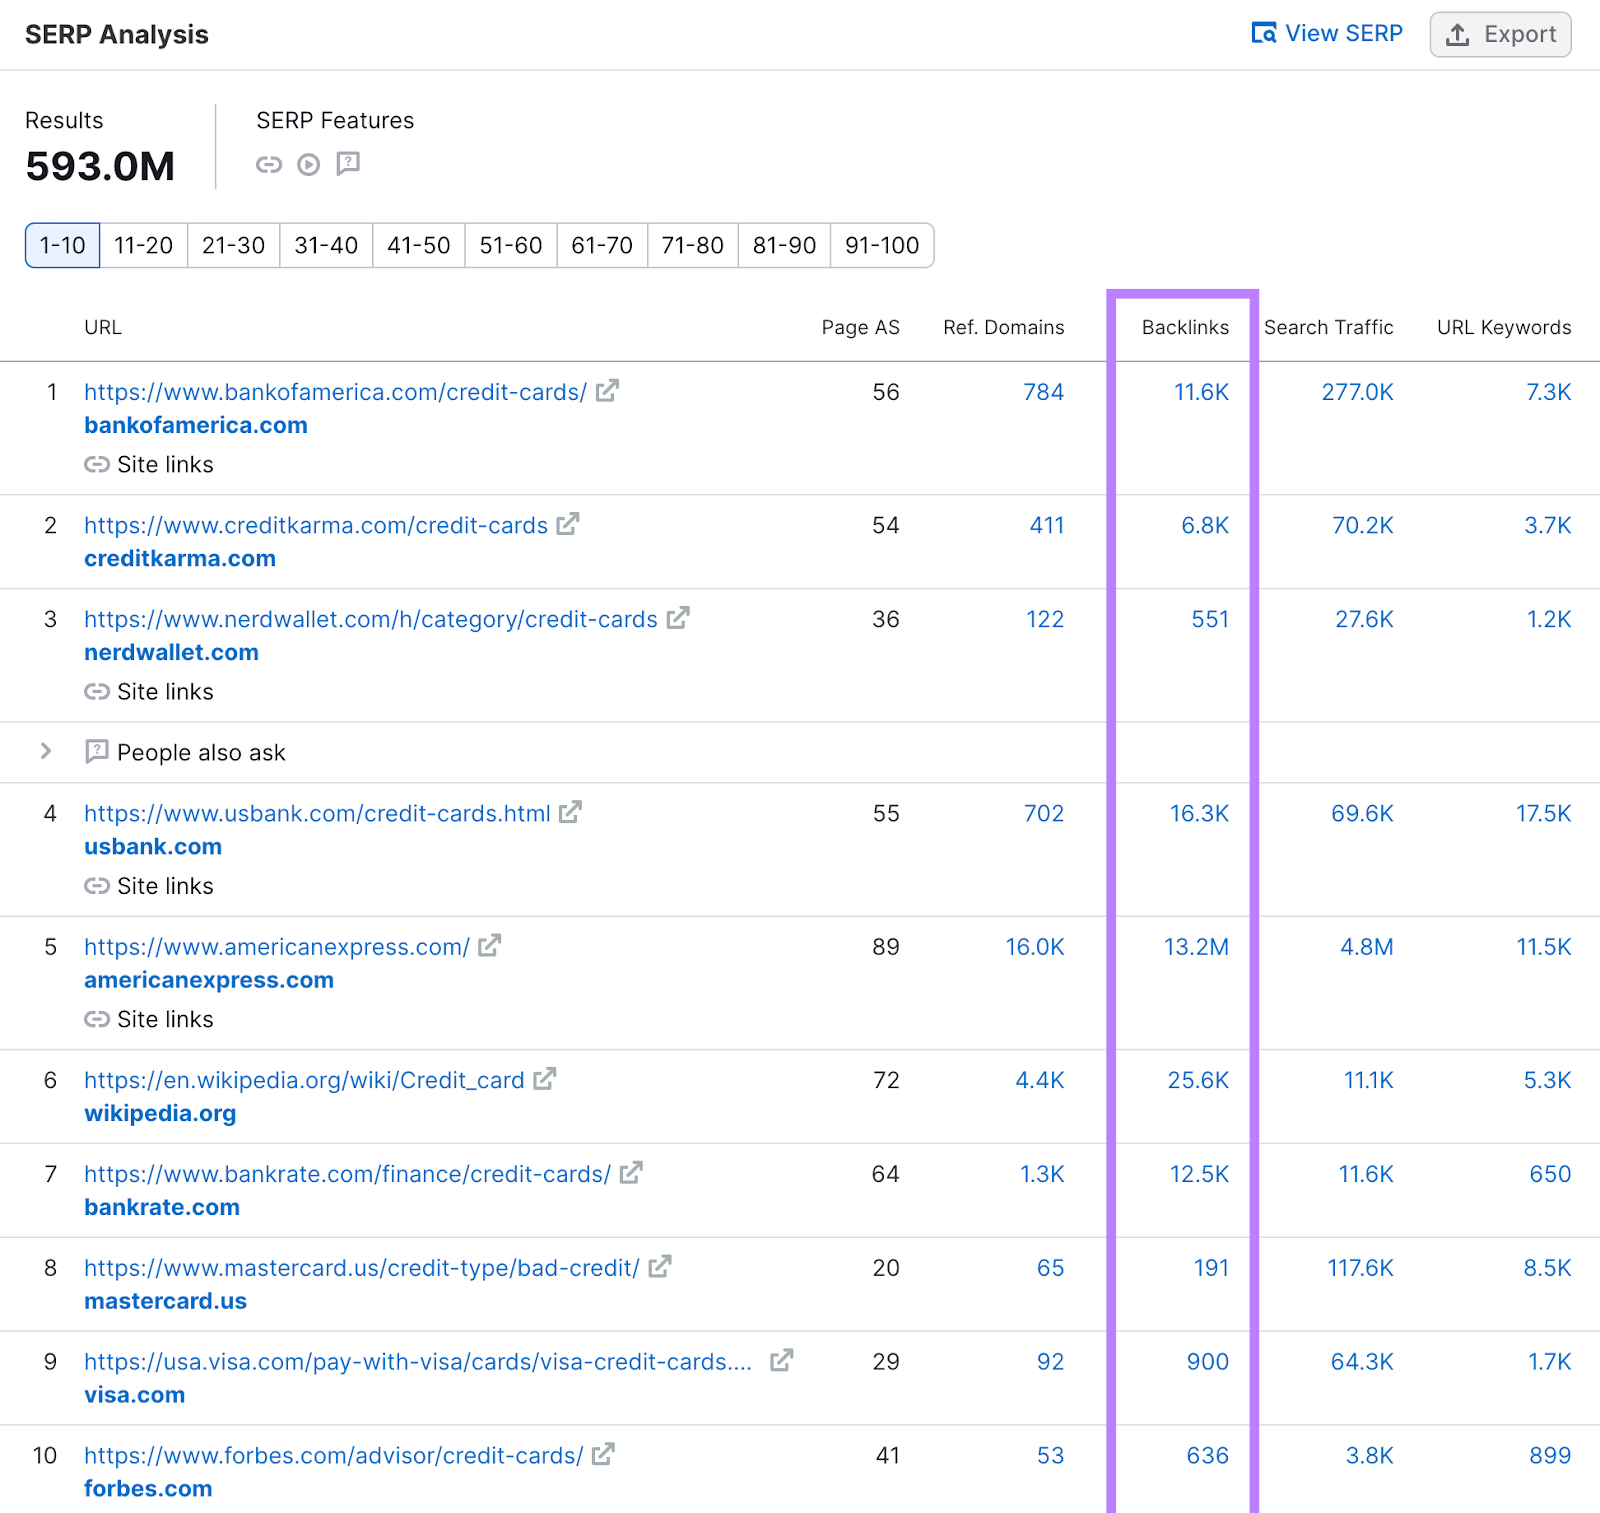 Backlinks column highlighted in the SERP analysis report